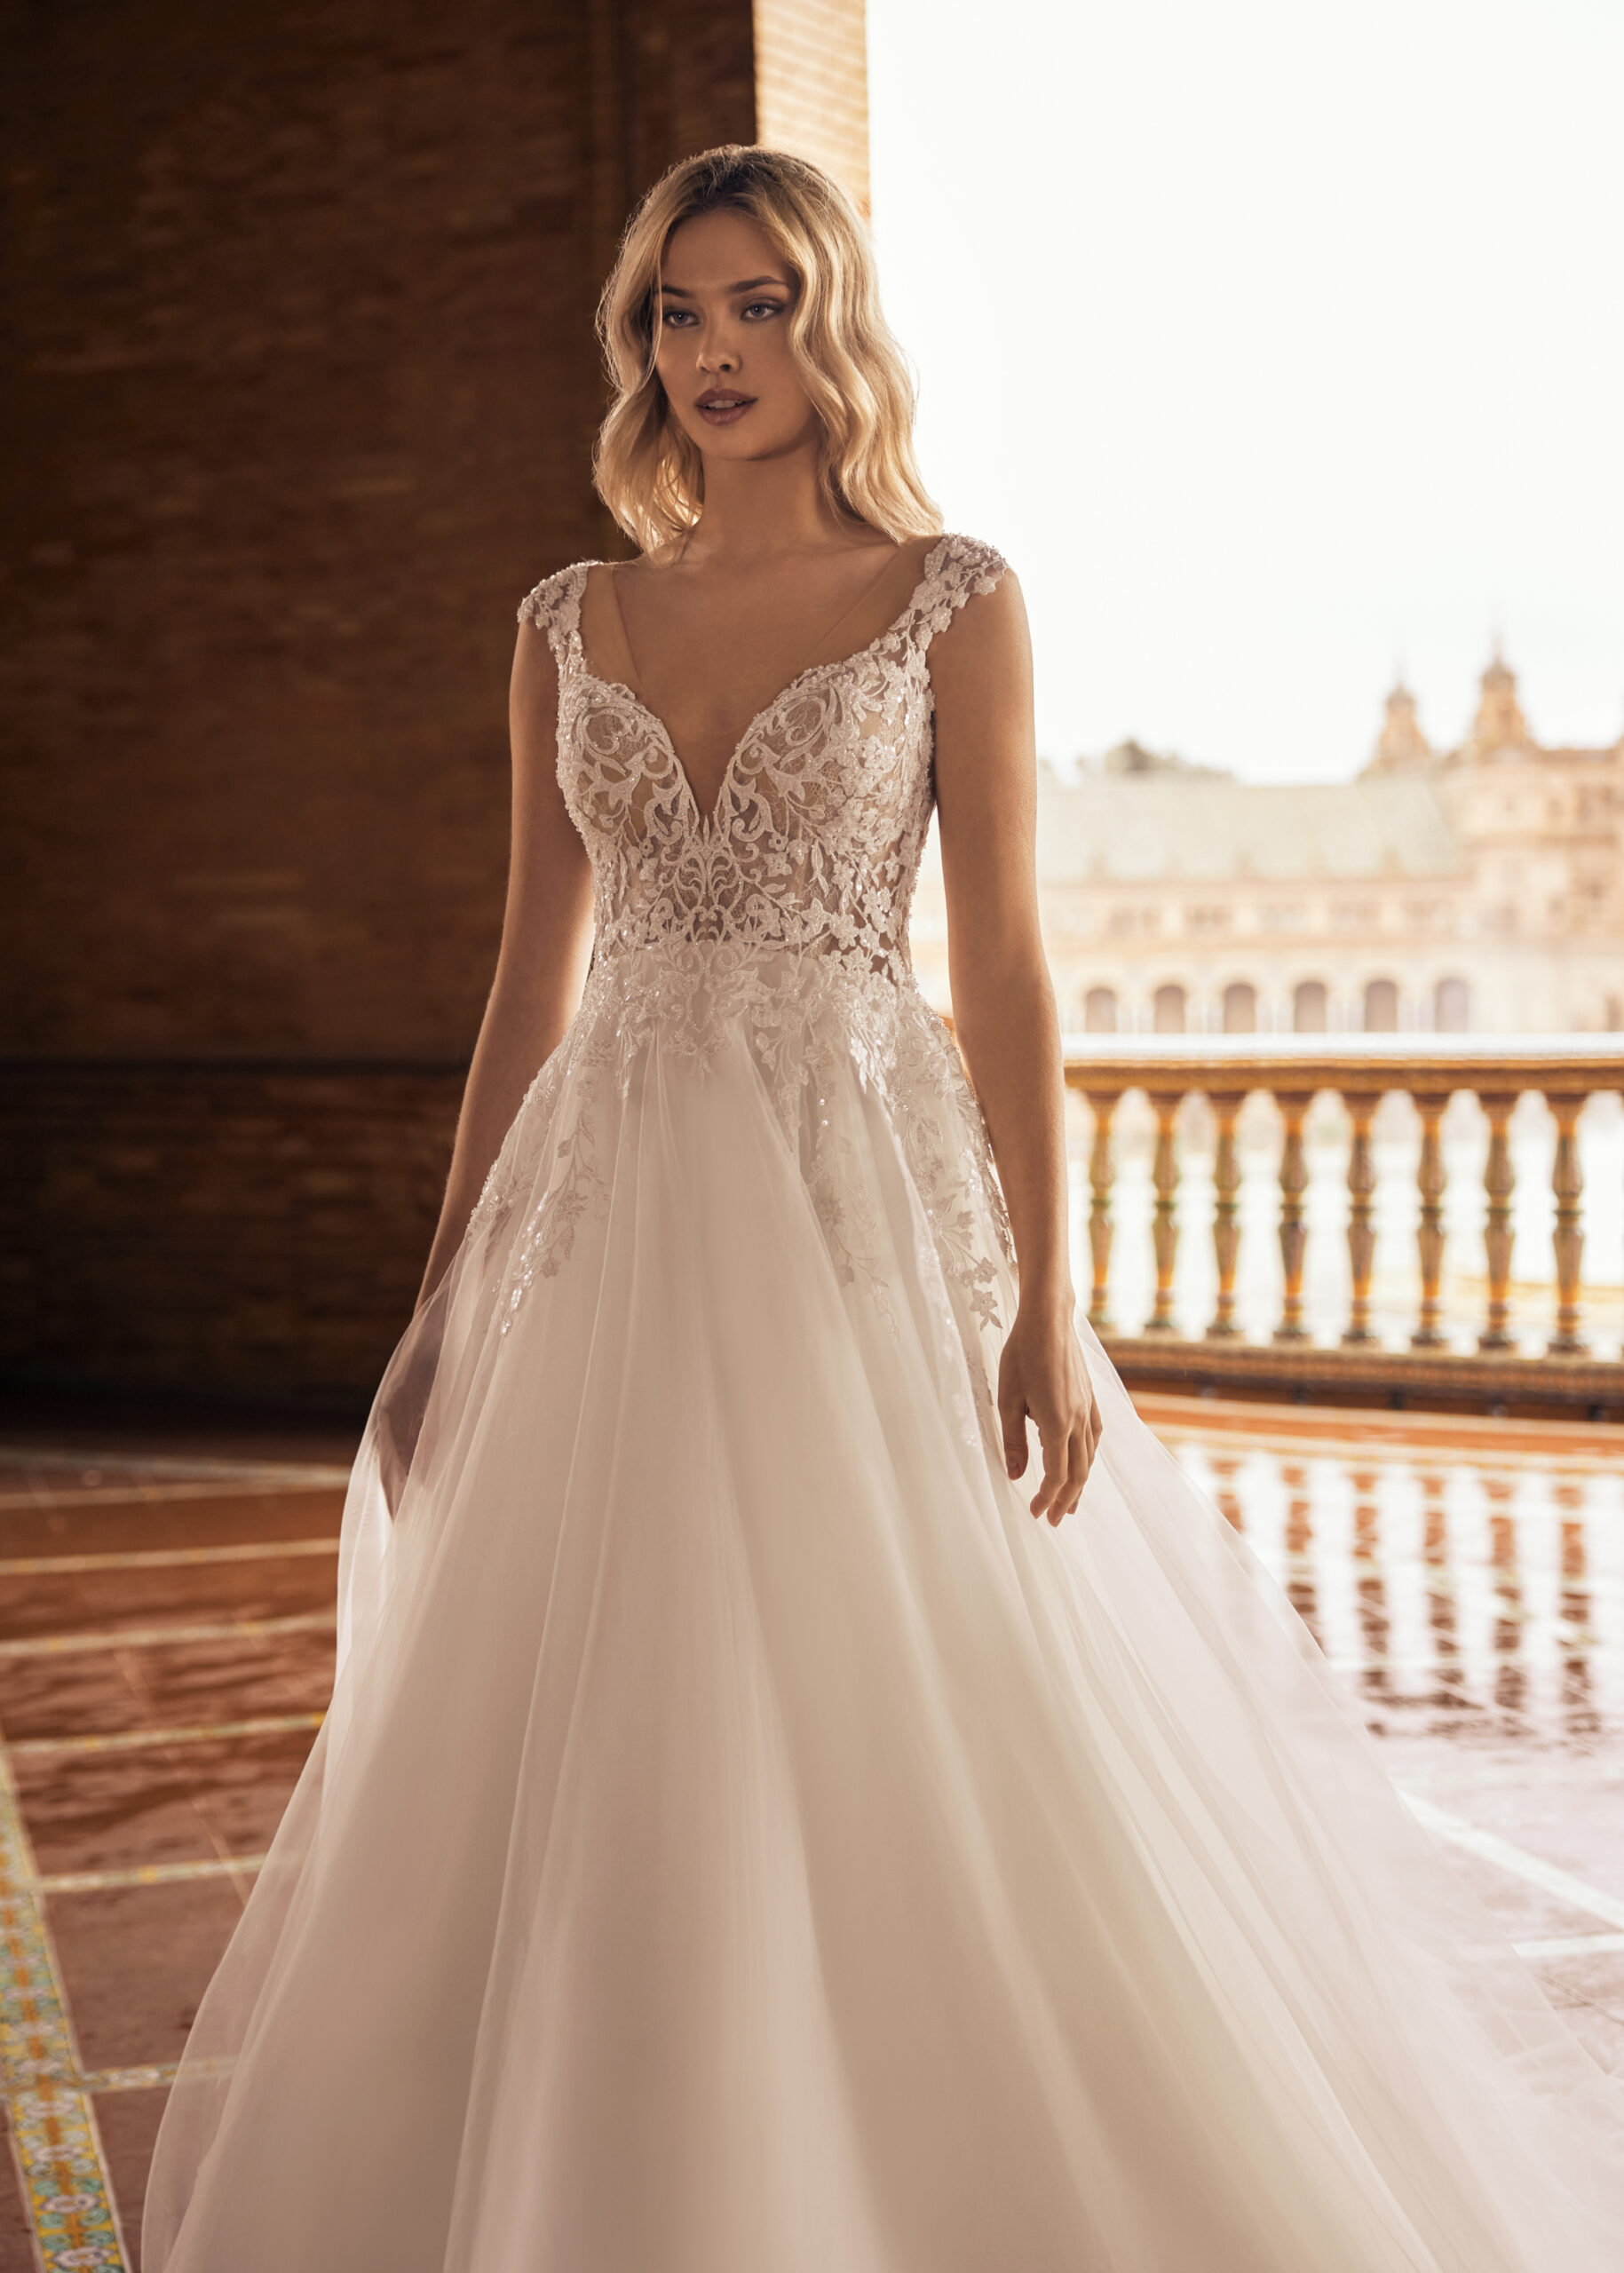 A wedding dress with sparkly lace details | Libelle Bridal